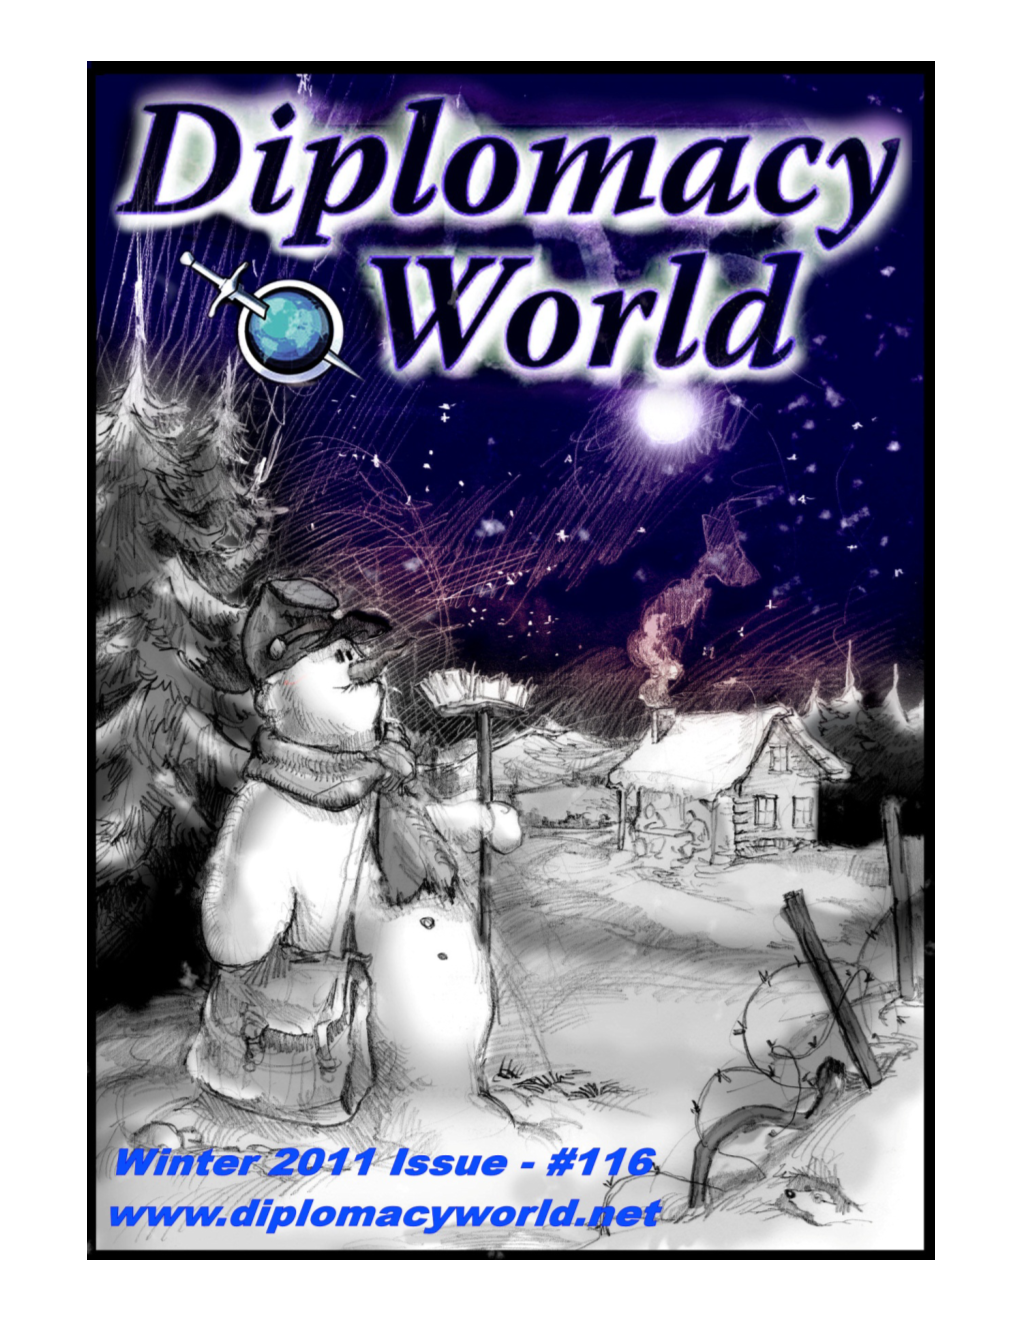 Diplomacy World #116, Winter 2011 Issue